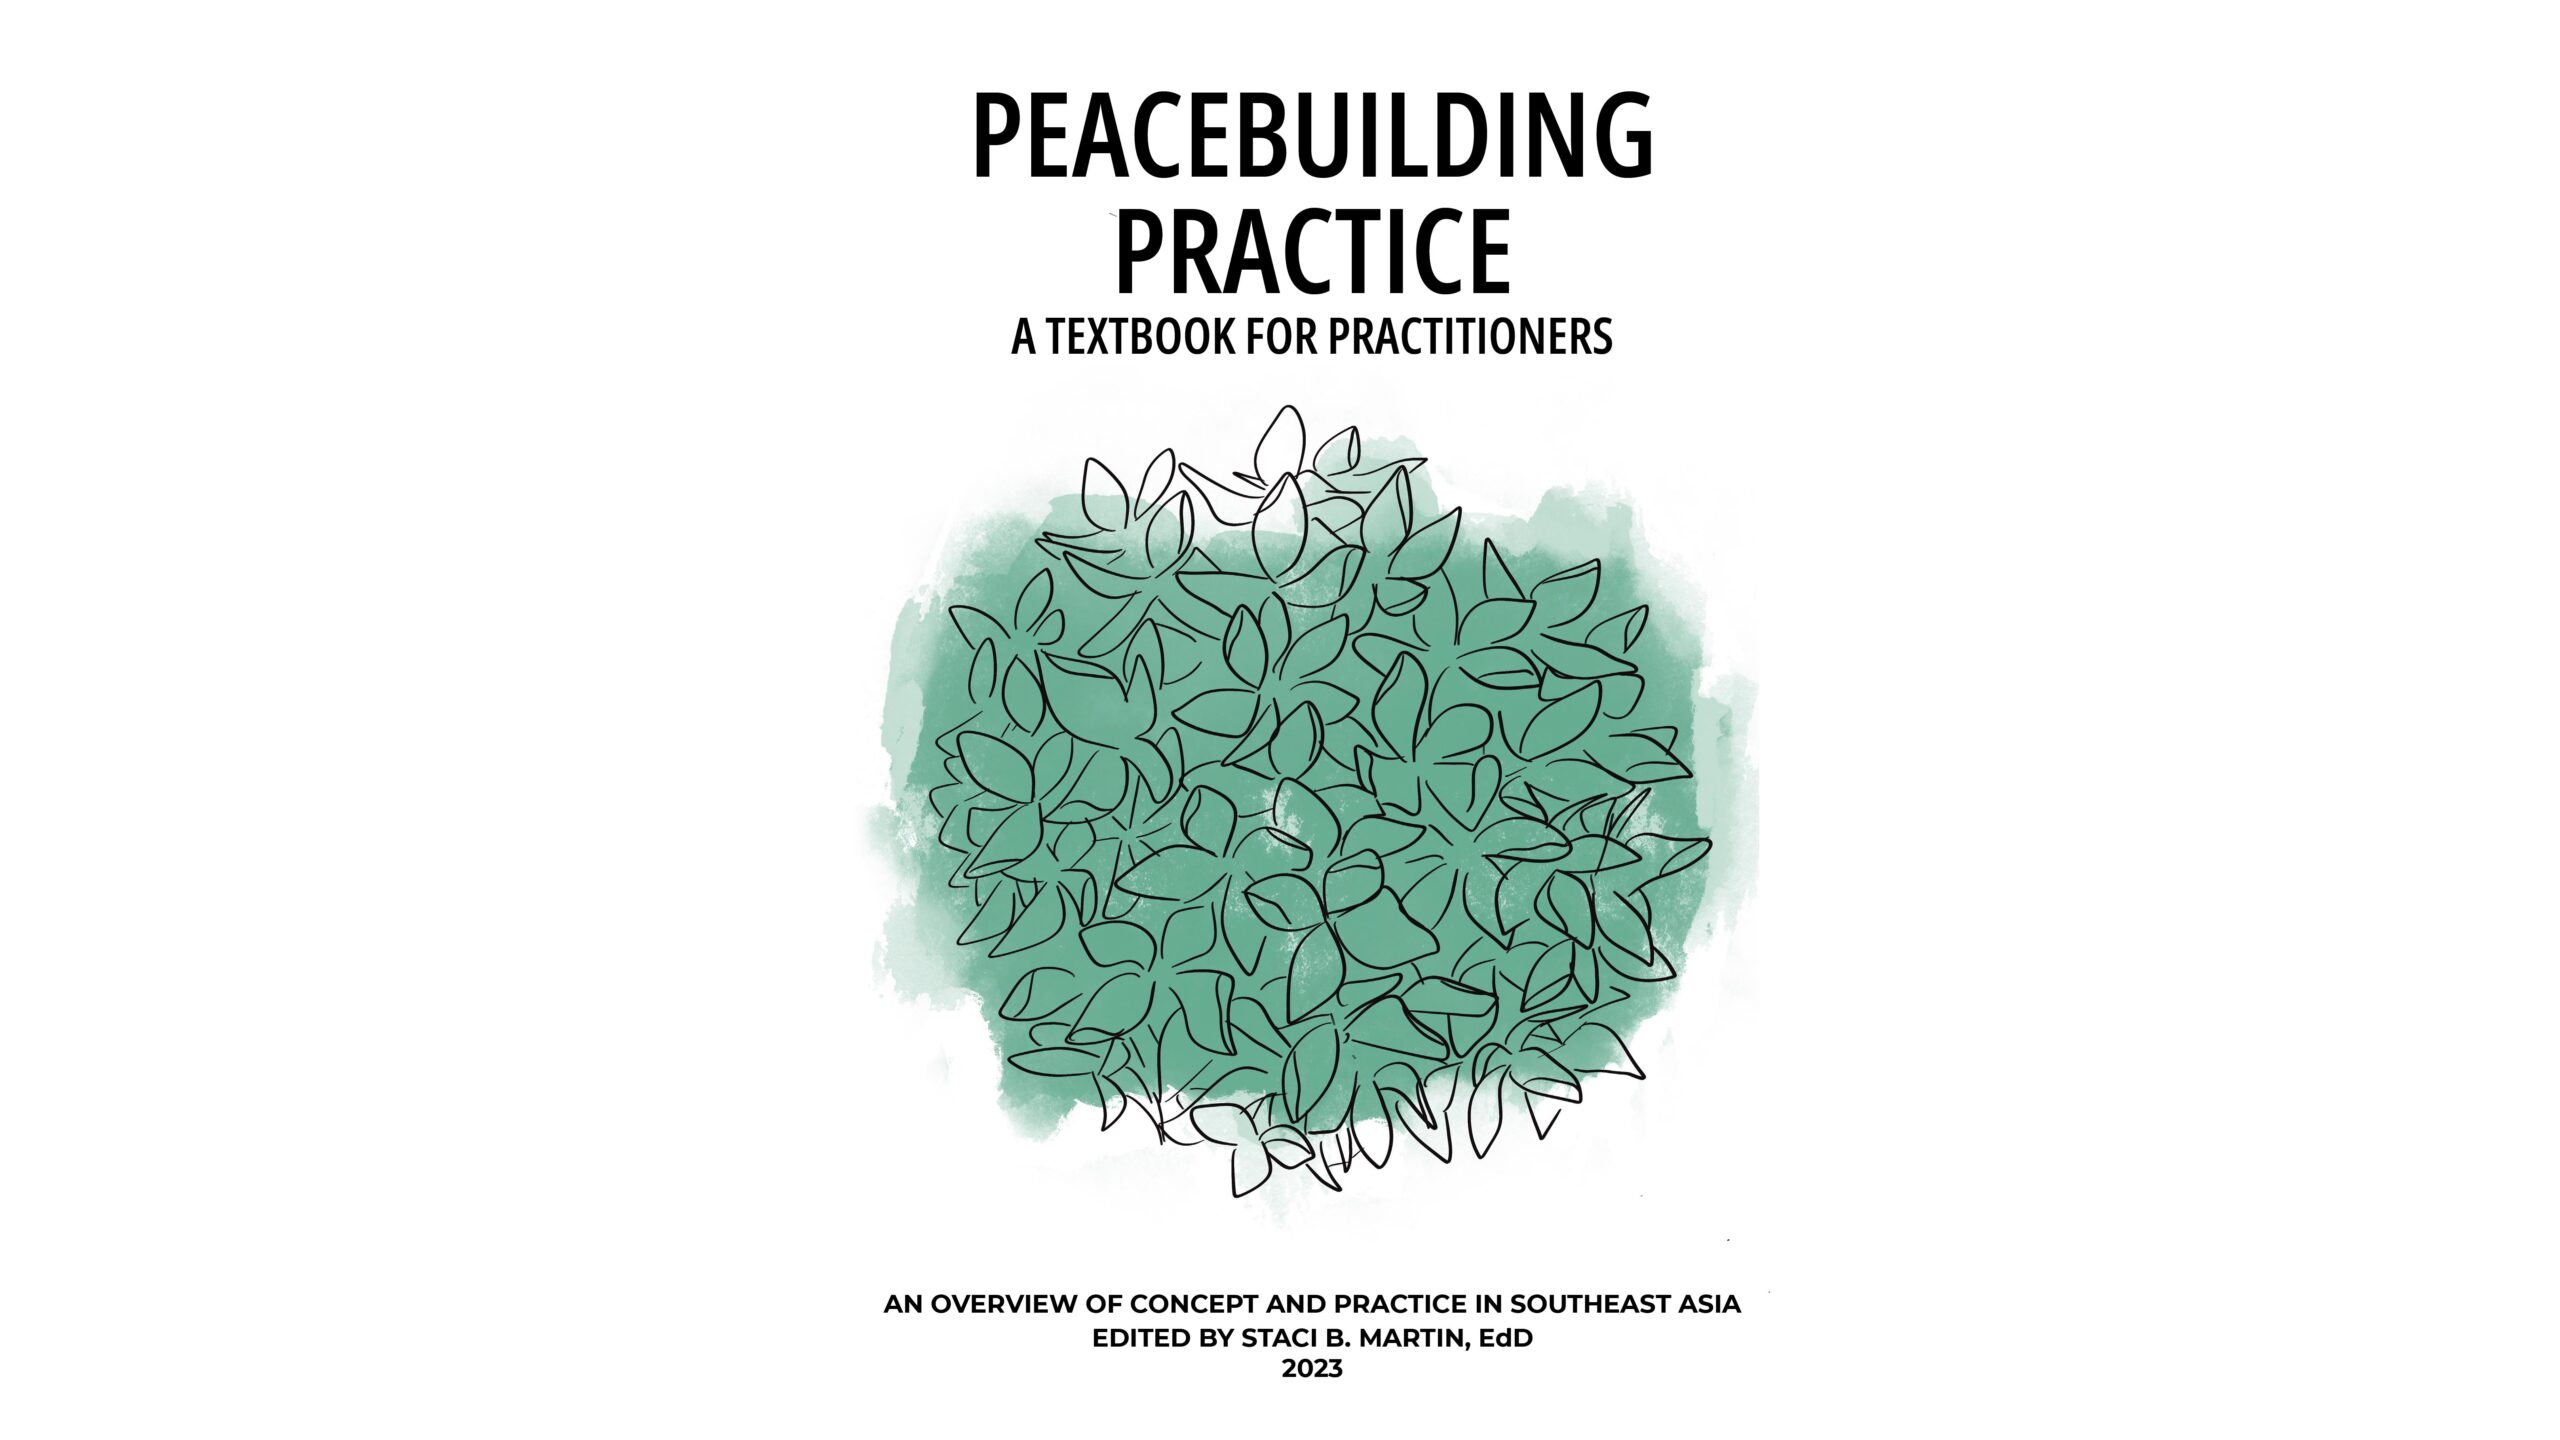 Peacebuilding Practice: A Textbook for Practitioners